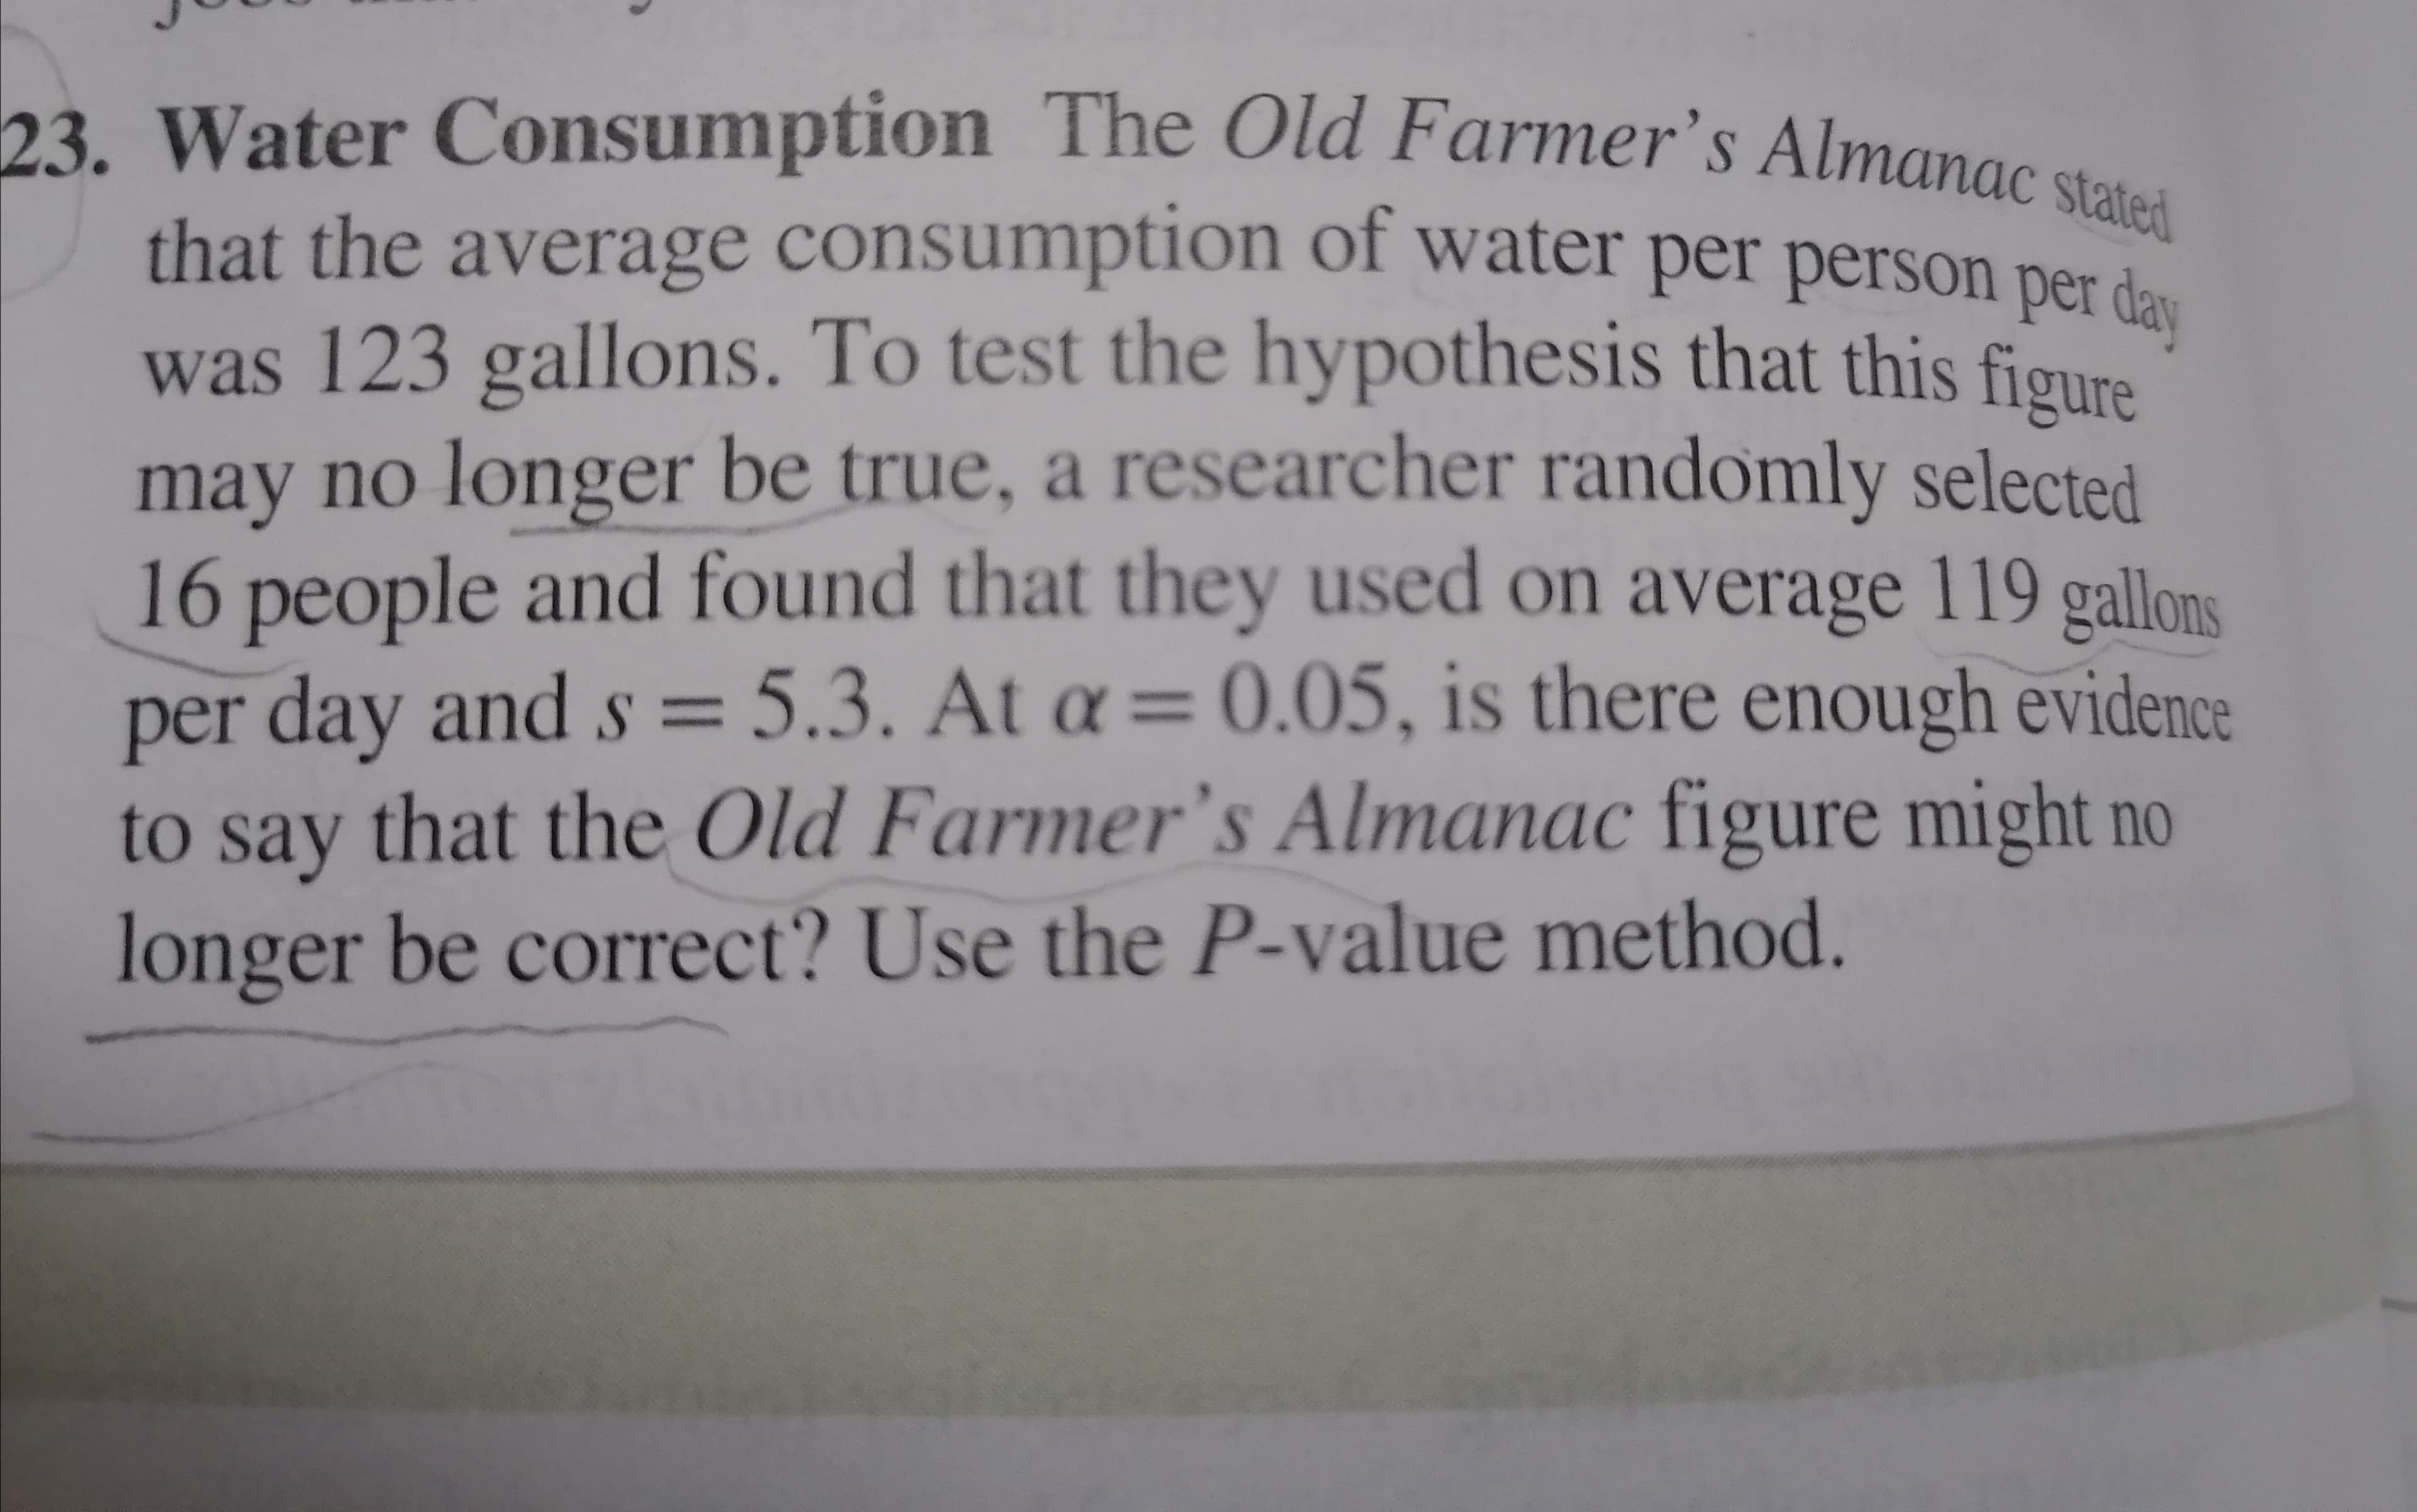 Water Consumption The Old Farmer's Almanac stated
that the average consumption of water per person per da
was 123 gallons. To test the hypothesis that this figure
may no longer be true, a researcher randomly selected
16 people and found that they used on average 119 gallons
per day and s = 5.3. At a = 0.05, is there enough evidence
S%3=
to say that the Old Farmer's Almanac figure might no
